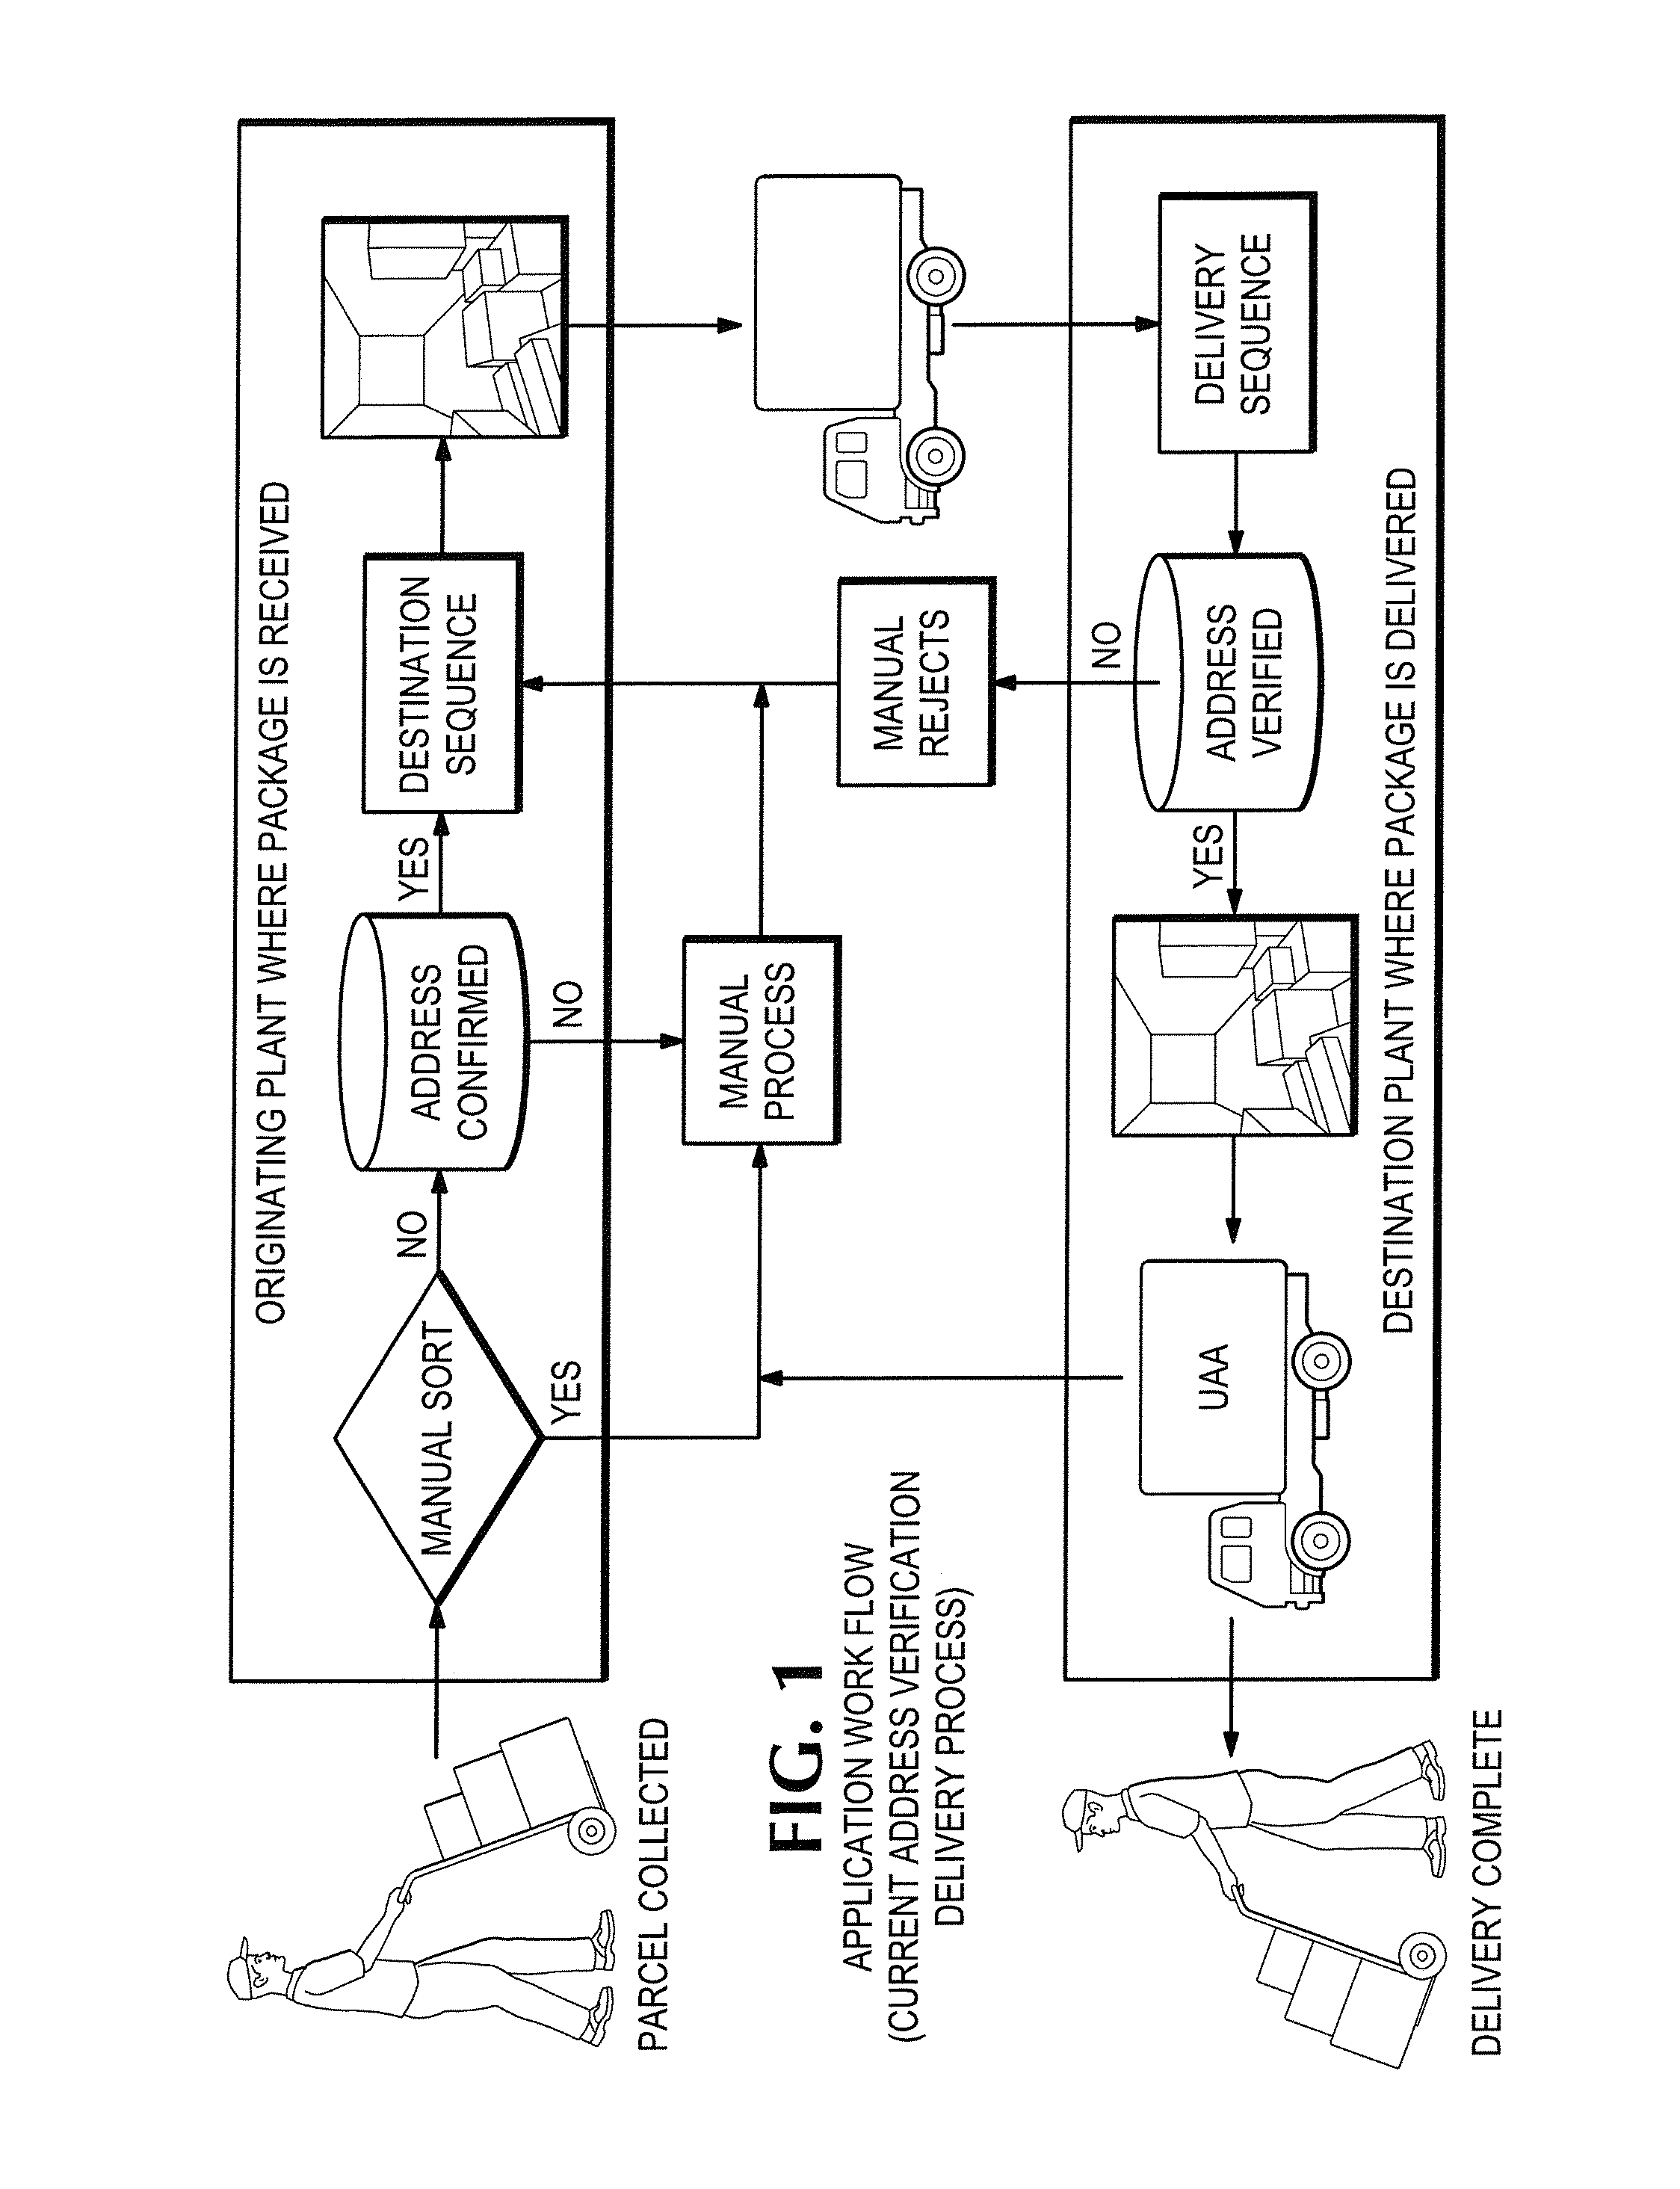 In-field device for de-centralized workflow automation